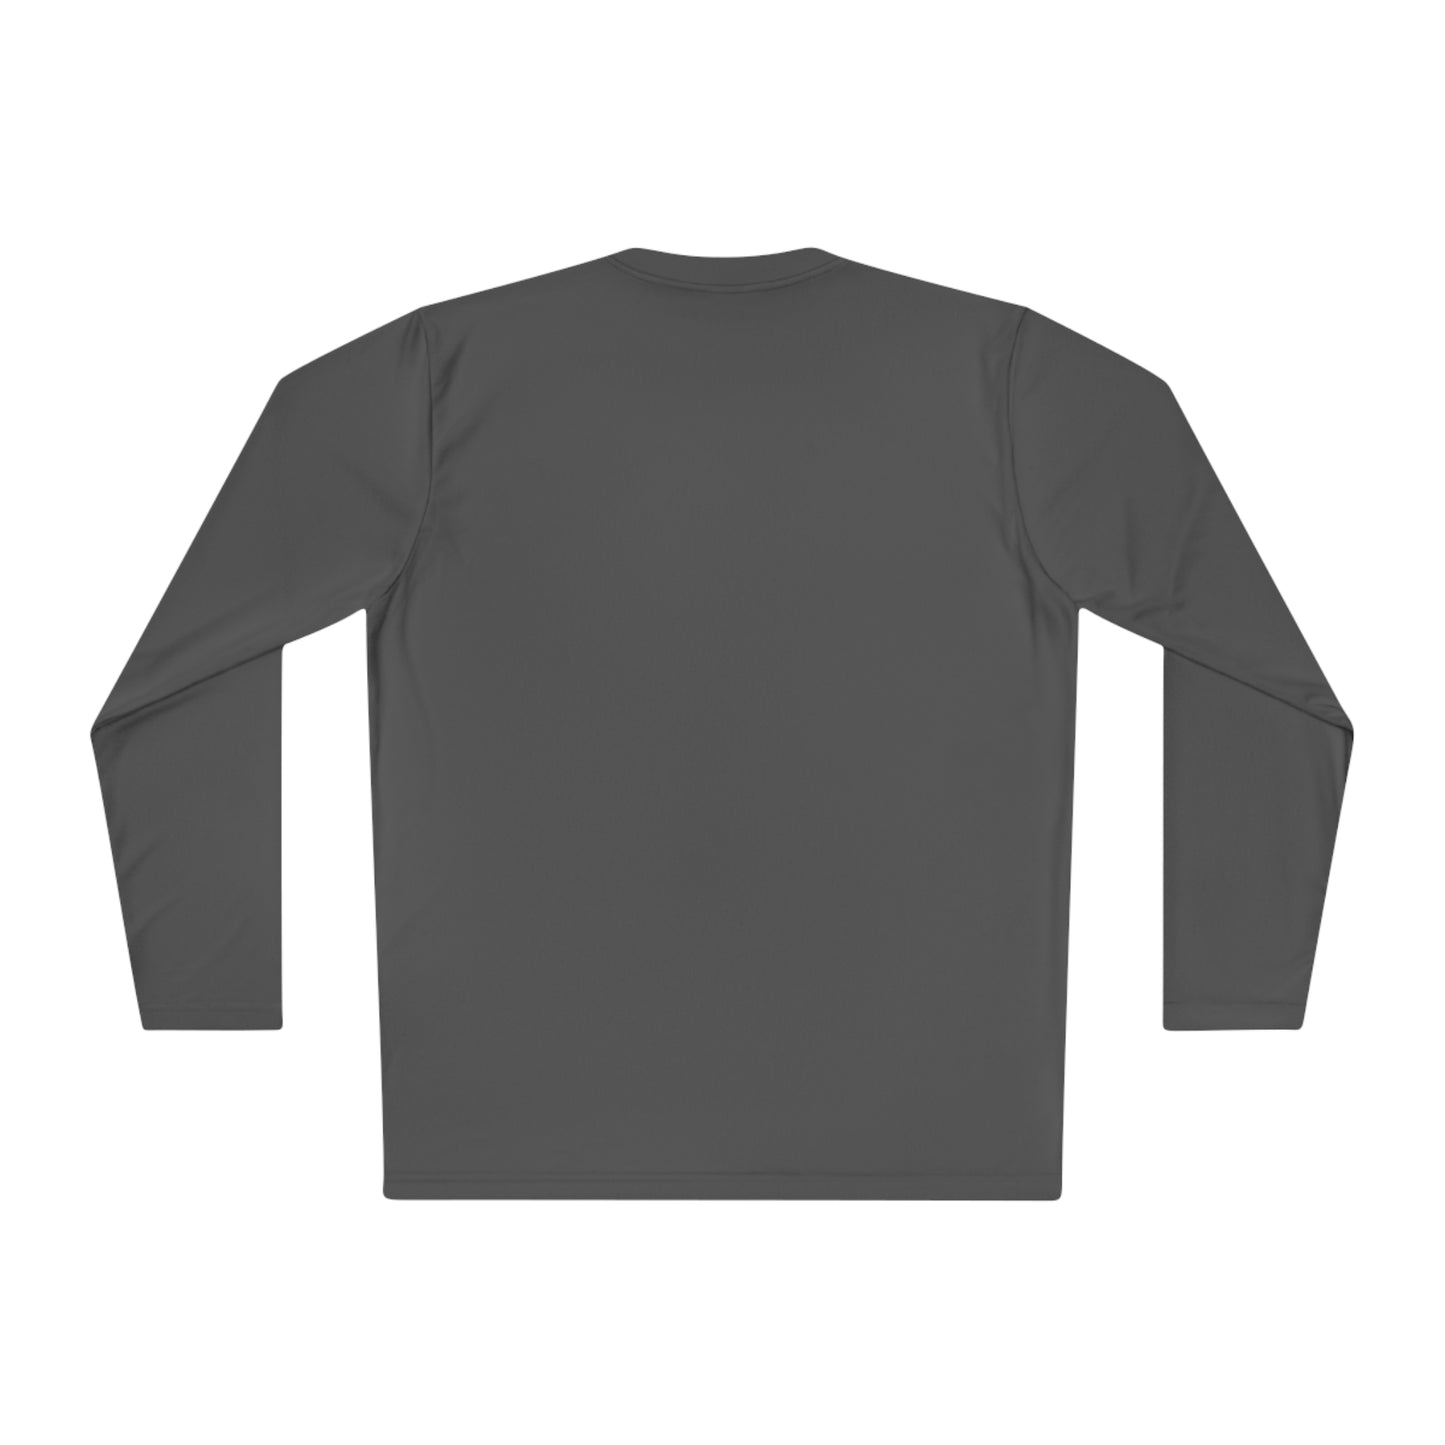 Performance Long Sleeve - The Cull